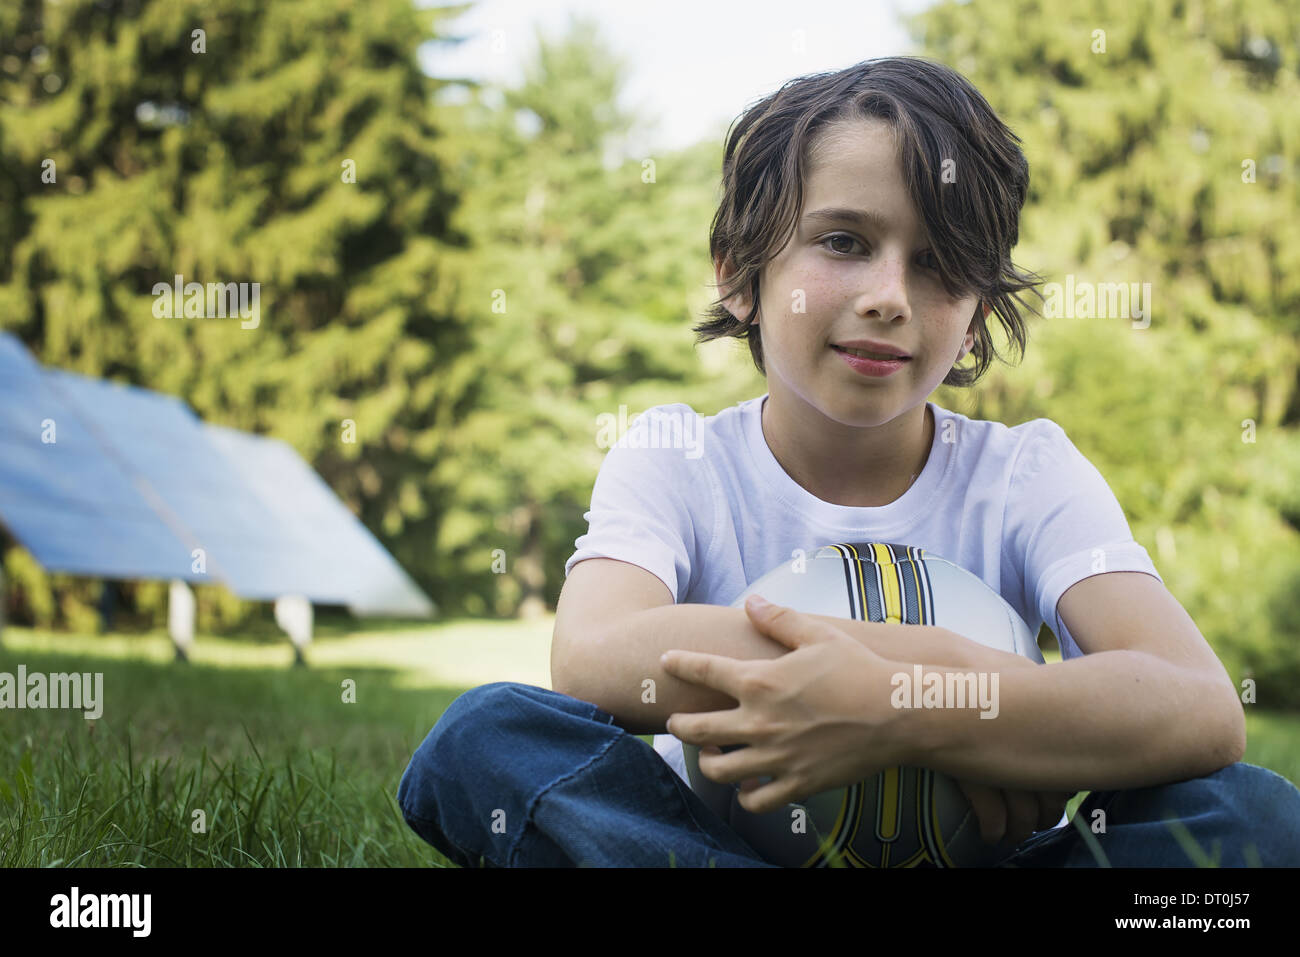 Woodstock, New York USA boy holding football sitting on grass panneaux solaires Banque D'Images